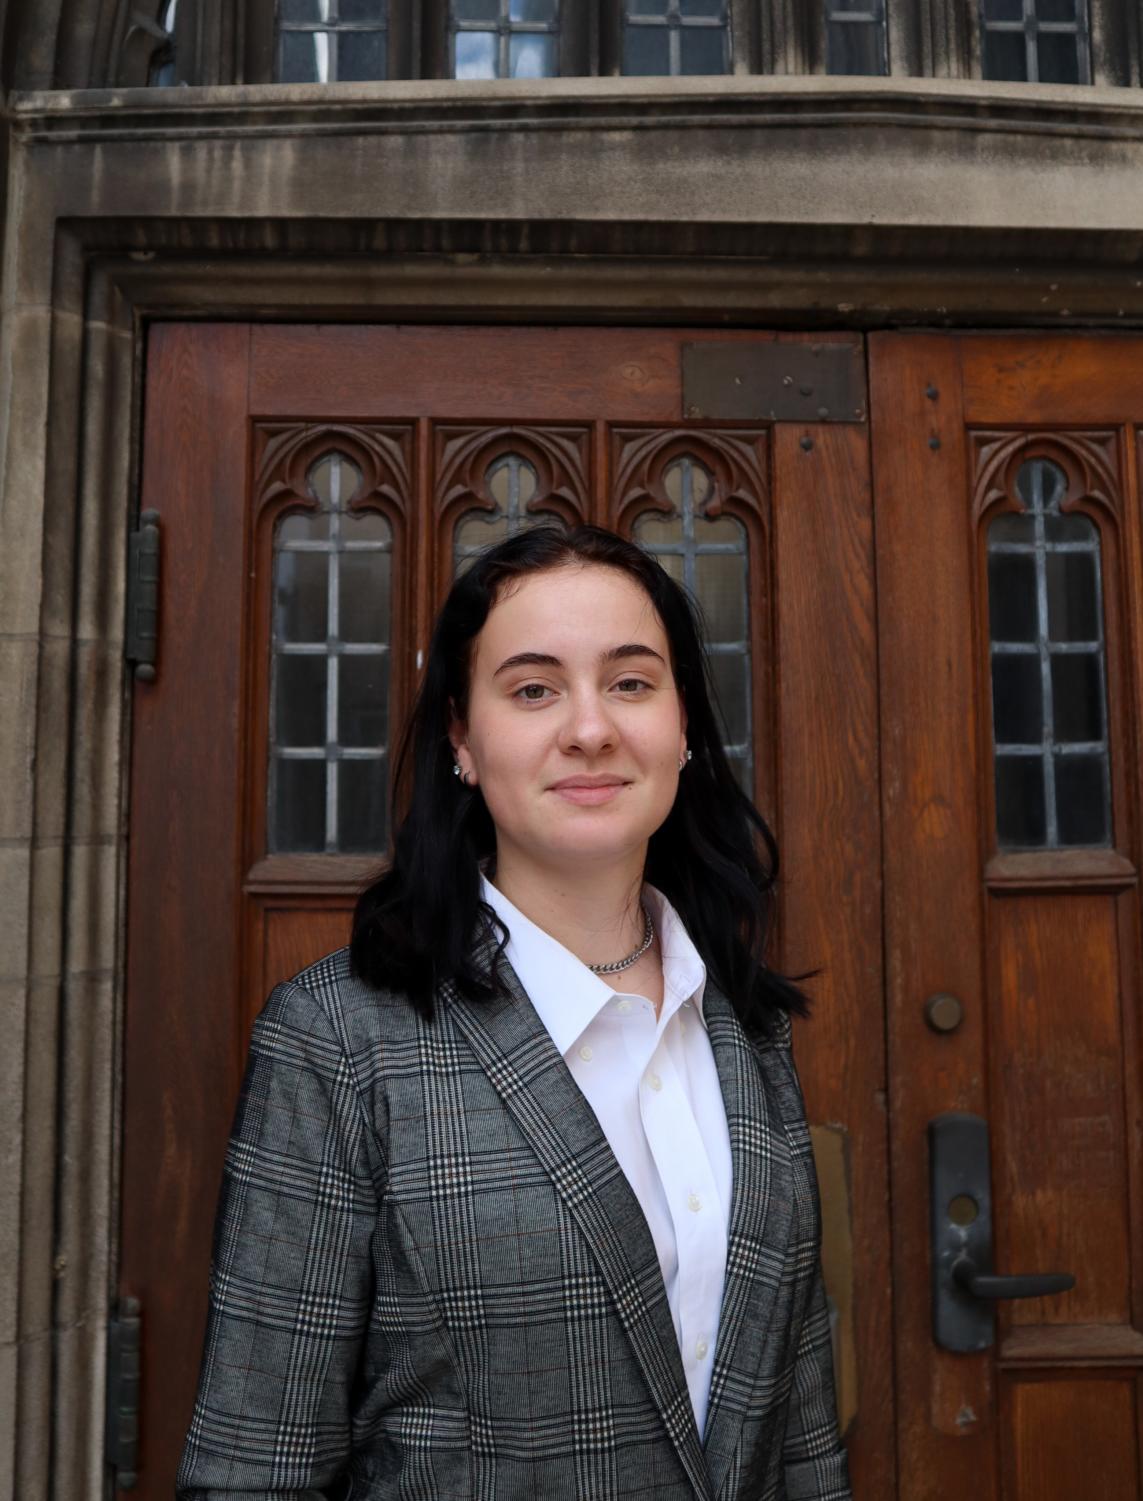 Julia Brestovitskiy, who has been on USG since her first year at the University, currently serves as the Chair of the Academic and Career Fairs Committee and the Chair of the Community Service Fund.